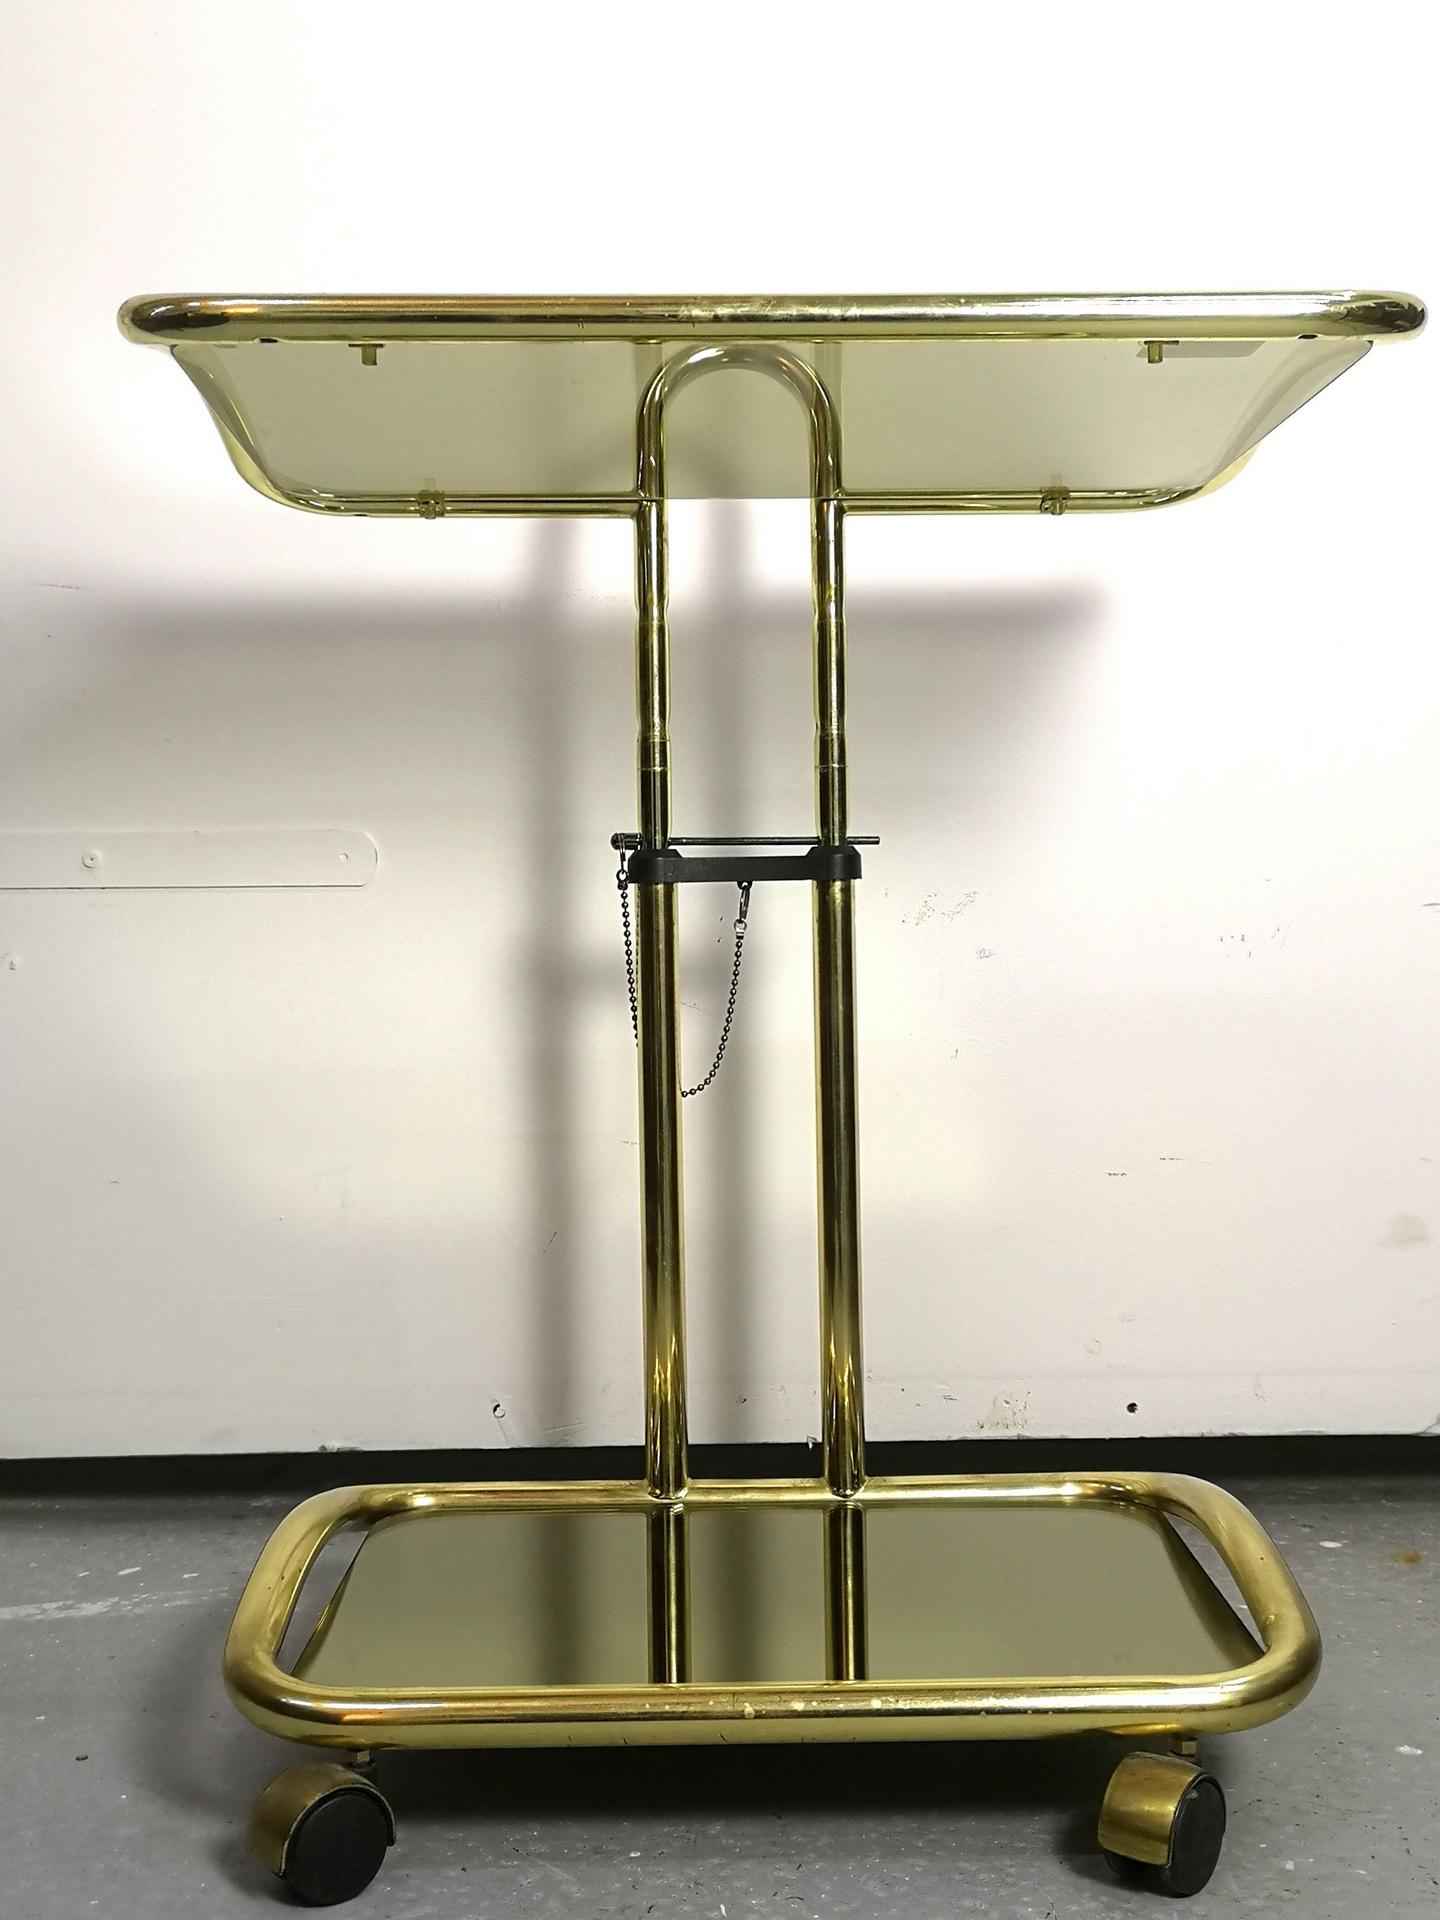 Italian Modern, this original piece is from Morex- a 1970s brass plated bar table on wheels. The height is adjustable, and still features the original Morex sticker. Rare piece in Hollywood regency style.